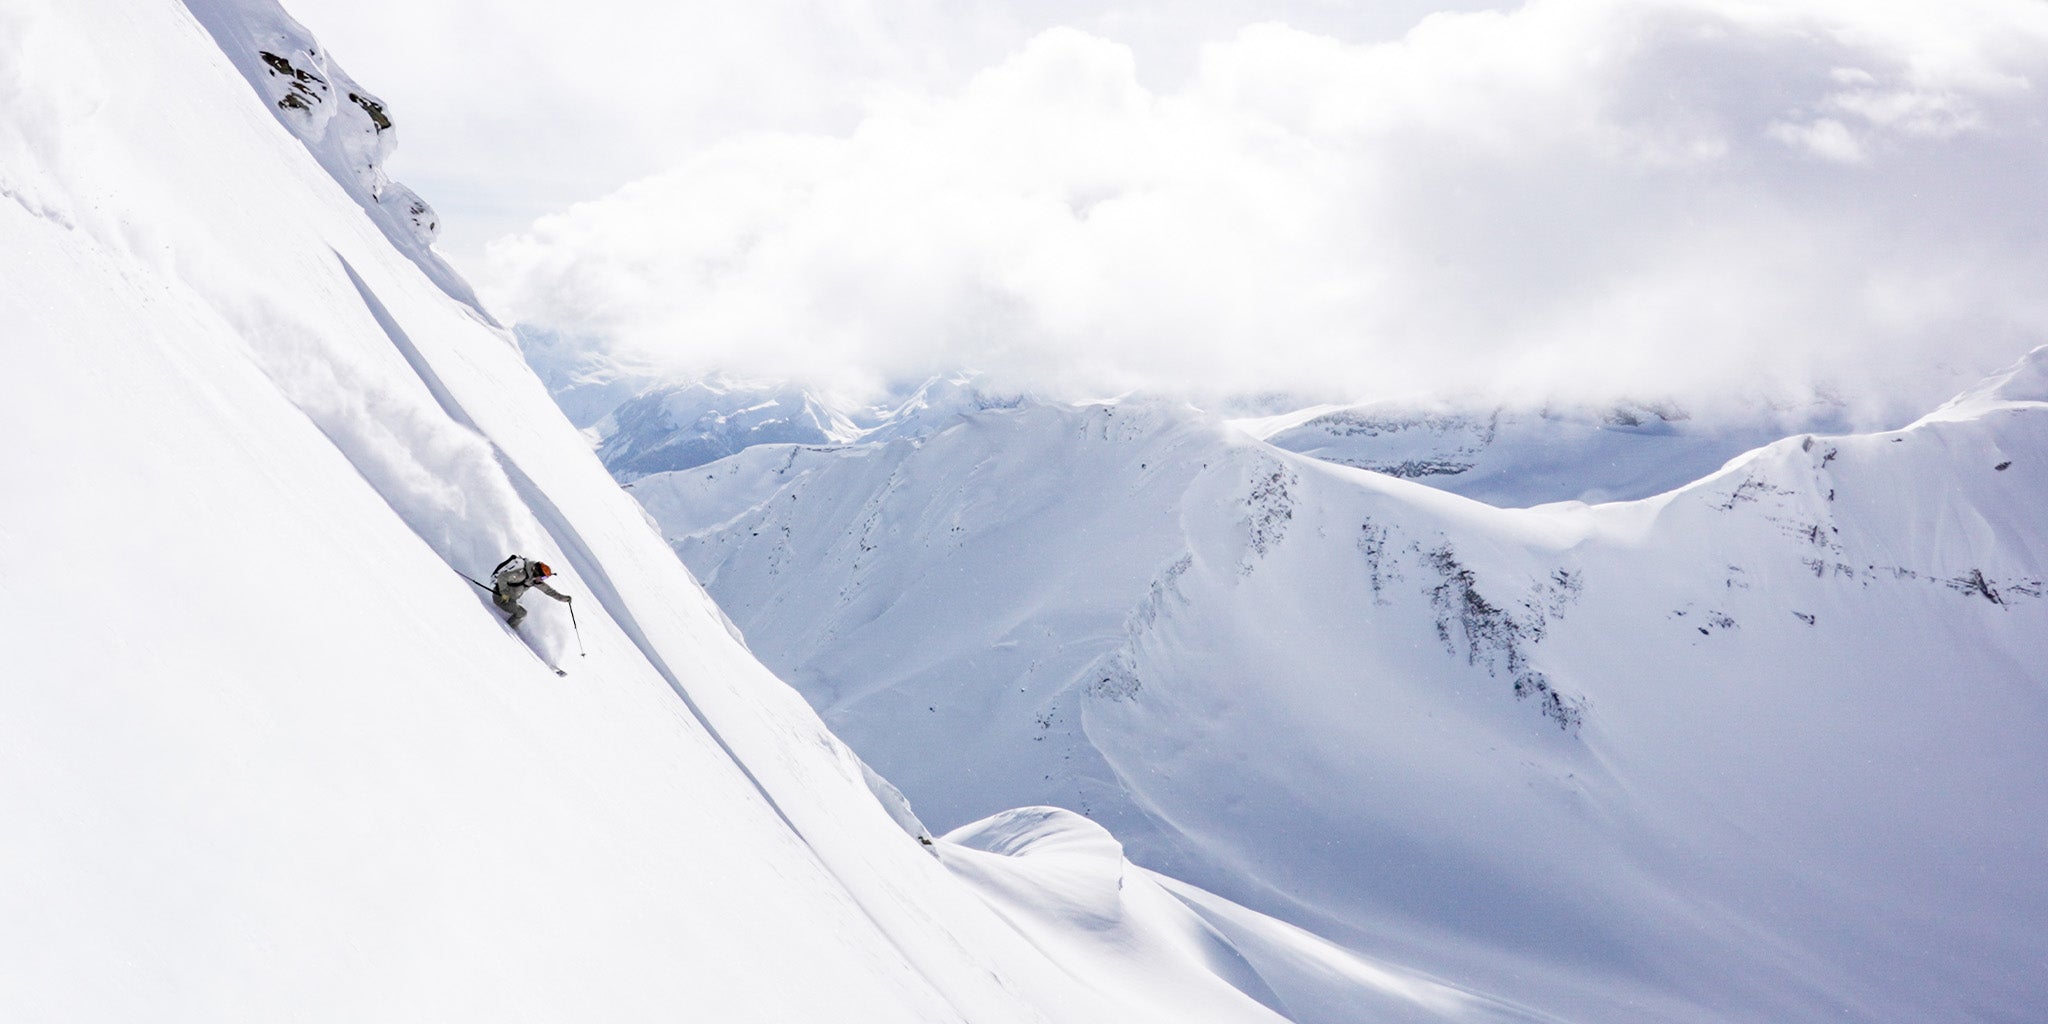 REFLECTIONS ON BACKCOUNTRY SKIING FROM CODY TOWNSEND AND IAN PROVO